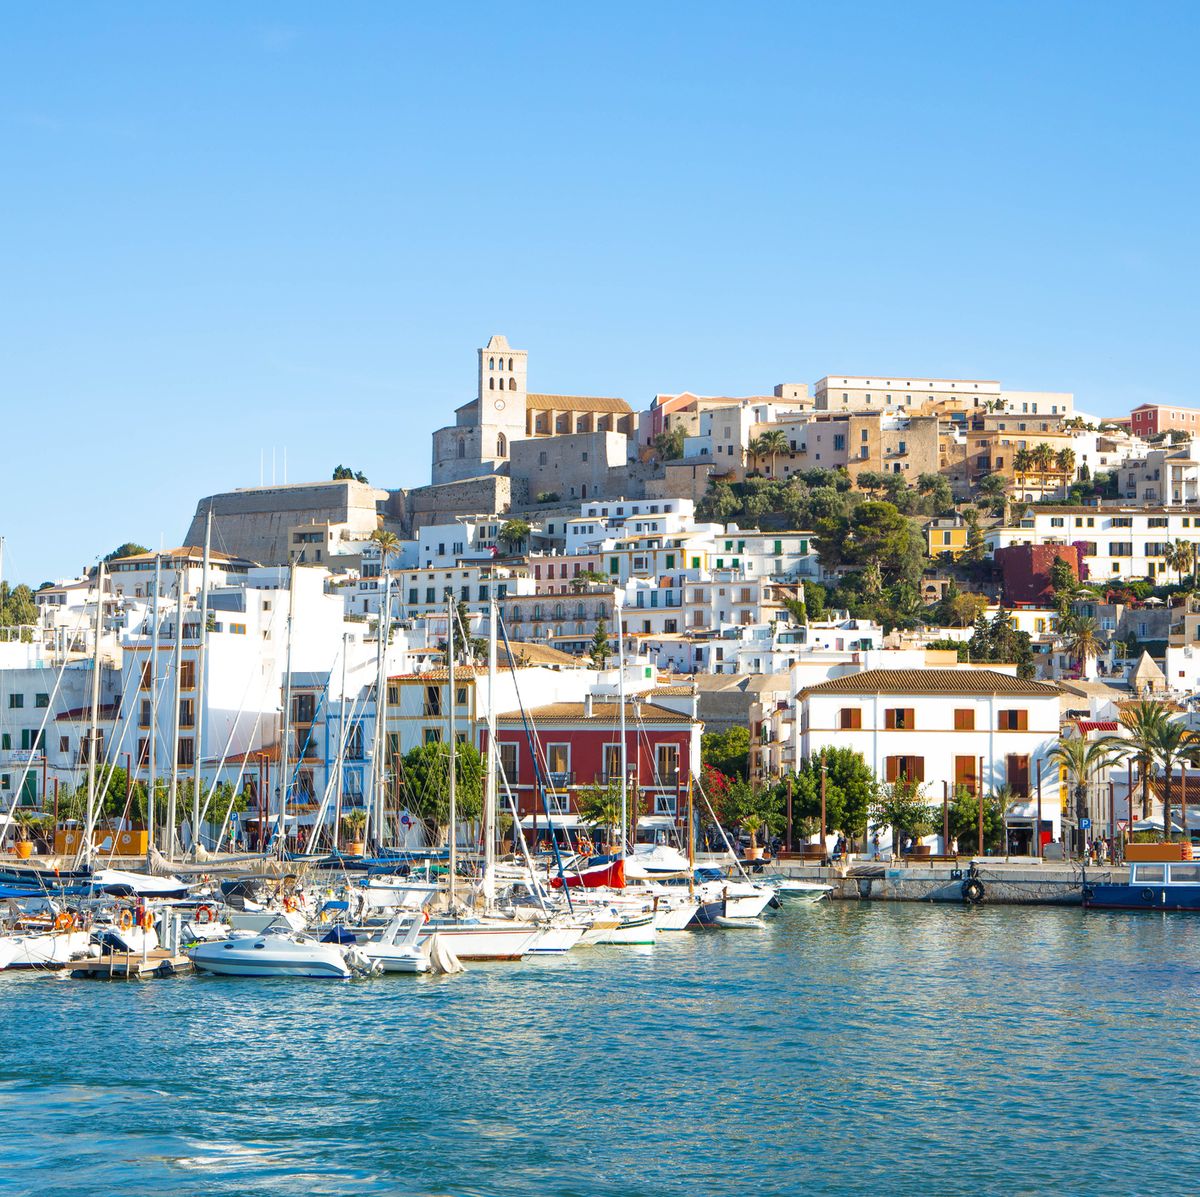 https://hips.hearstapps.com/hmg-prod/images/the-colorful-old-town-of-ibiza-with-the-royalty-free-image-1647876520.jpg?crop=0.668xw:1.00xh;0.104xw,0&resize=1200:*